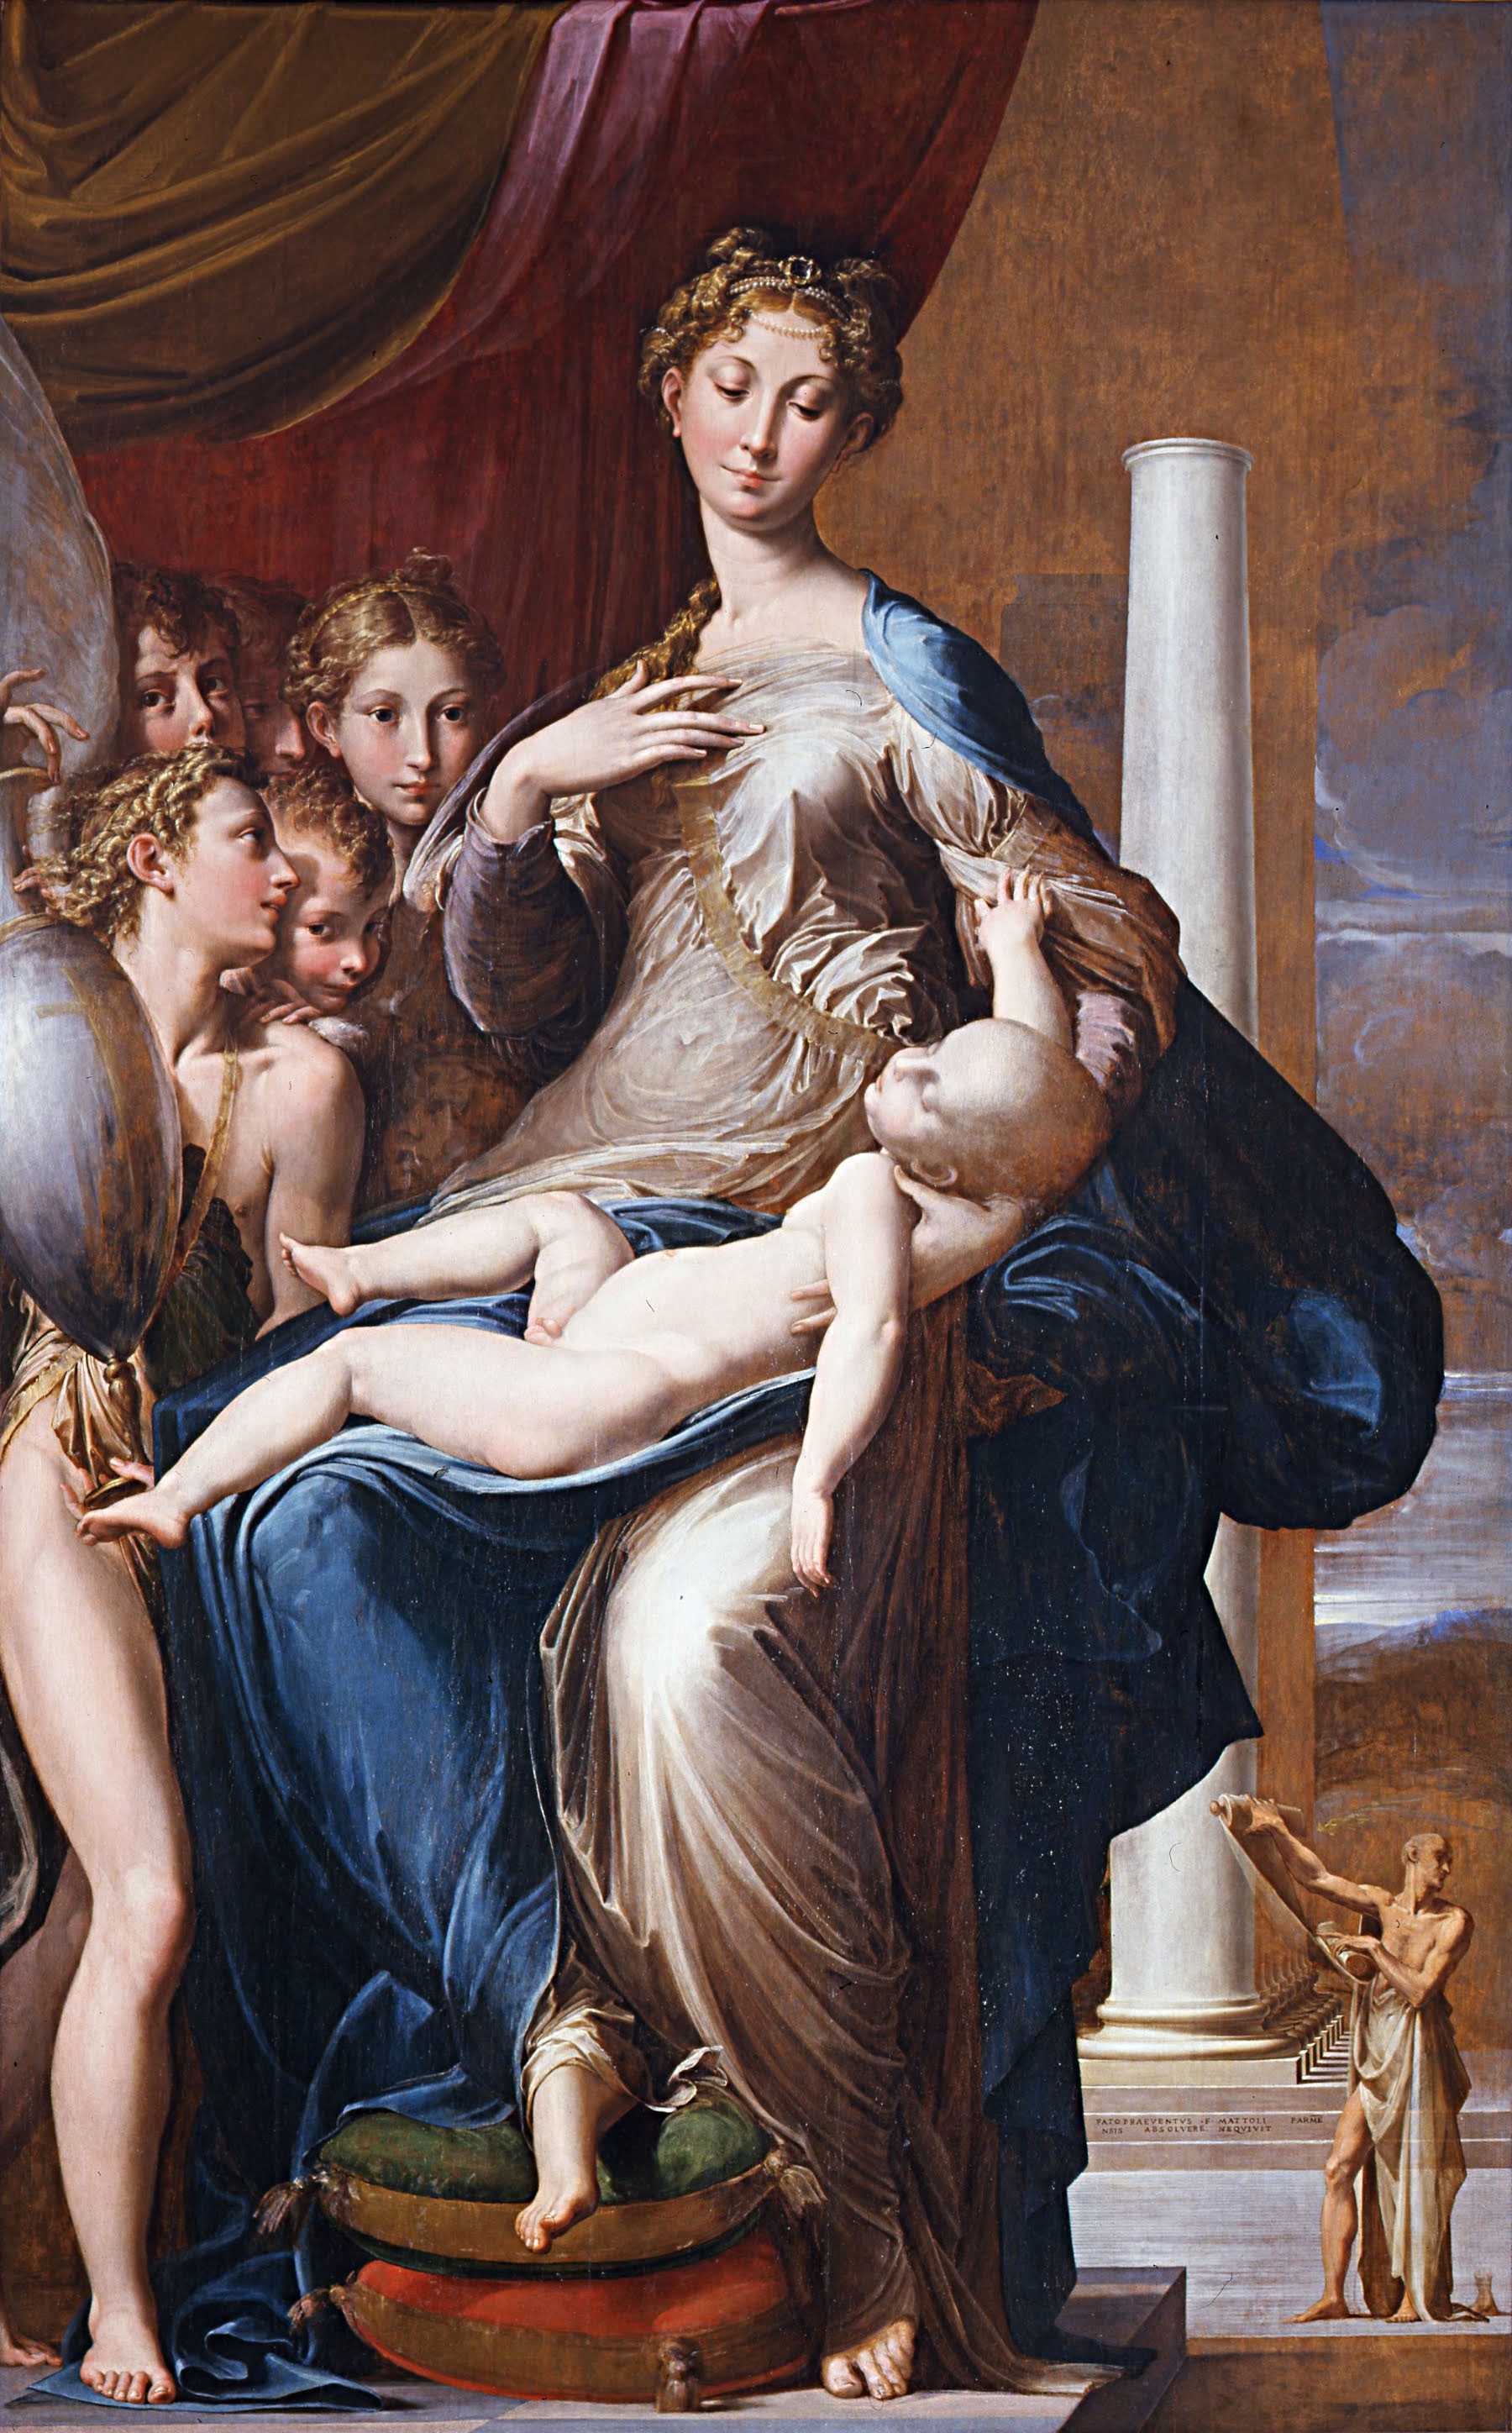 Madonna of the Long Neck (1534-40) by Parmigianino, as reproduced in Art in Time